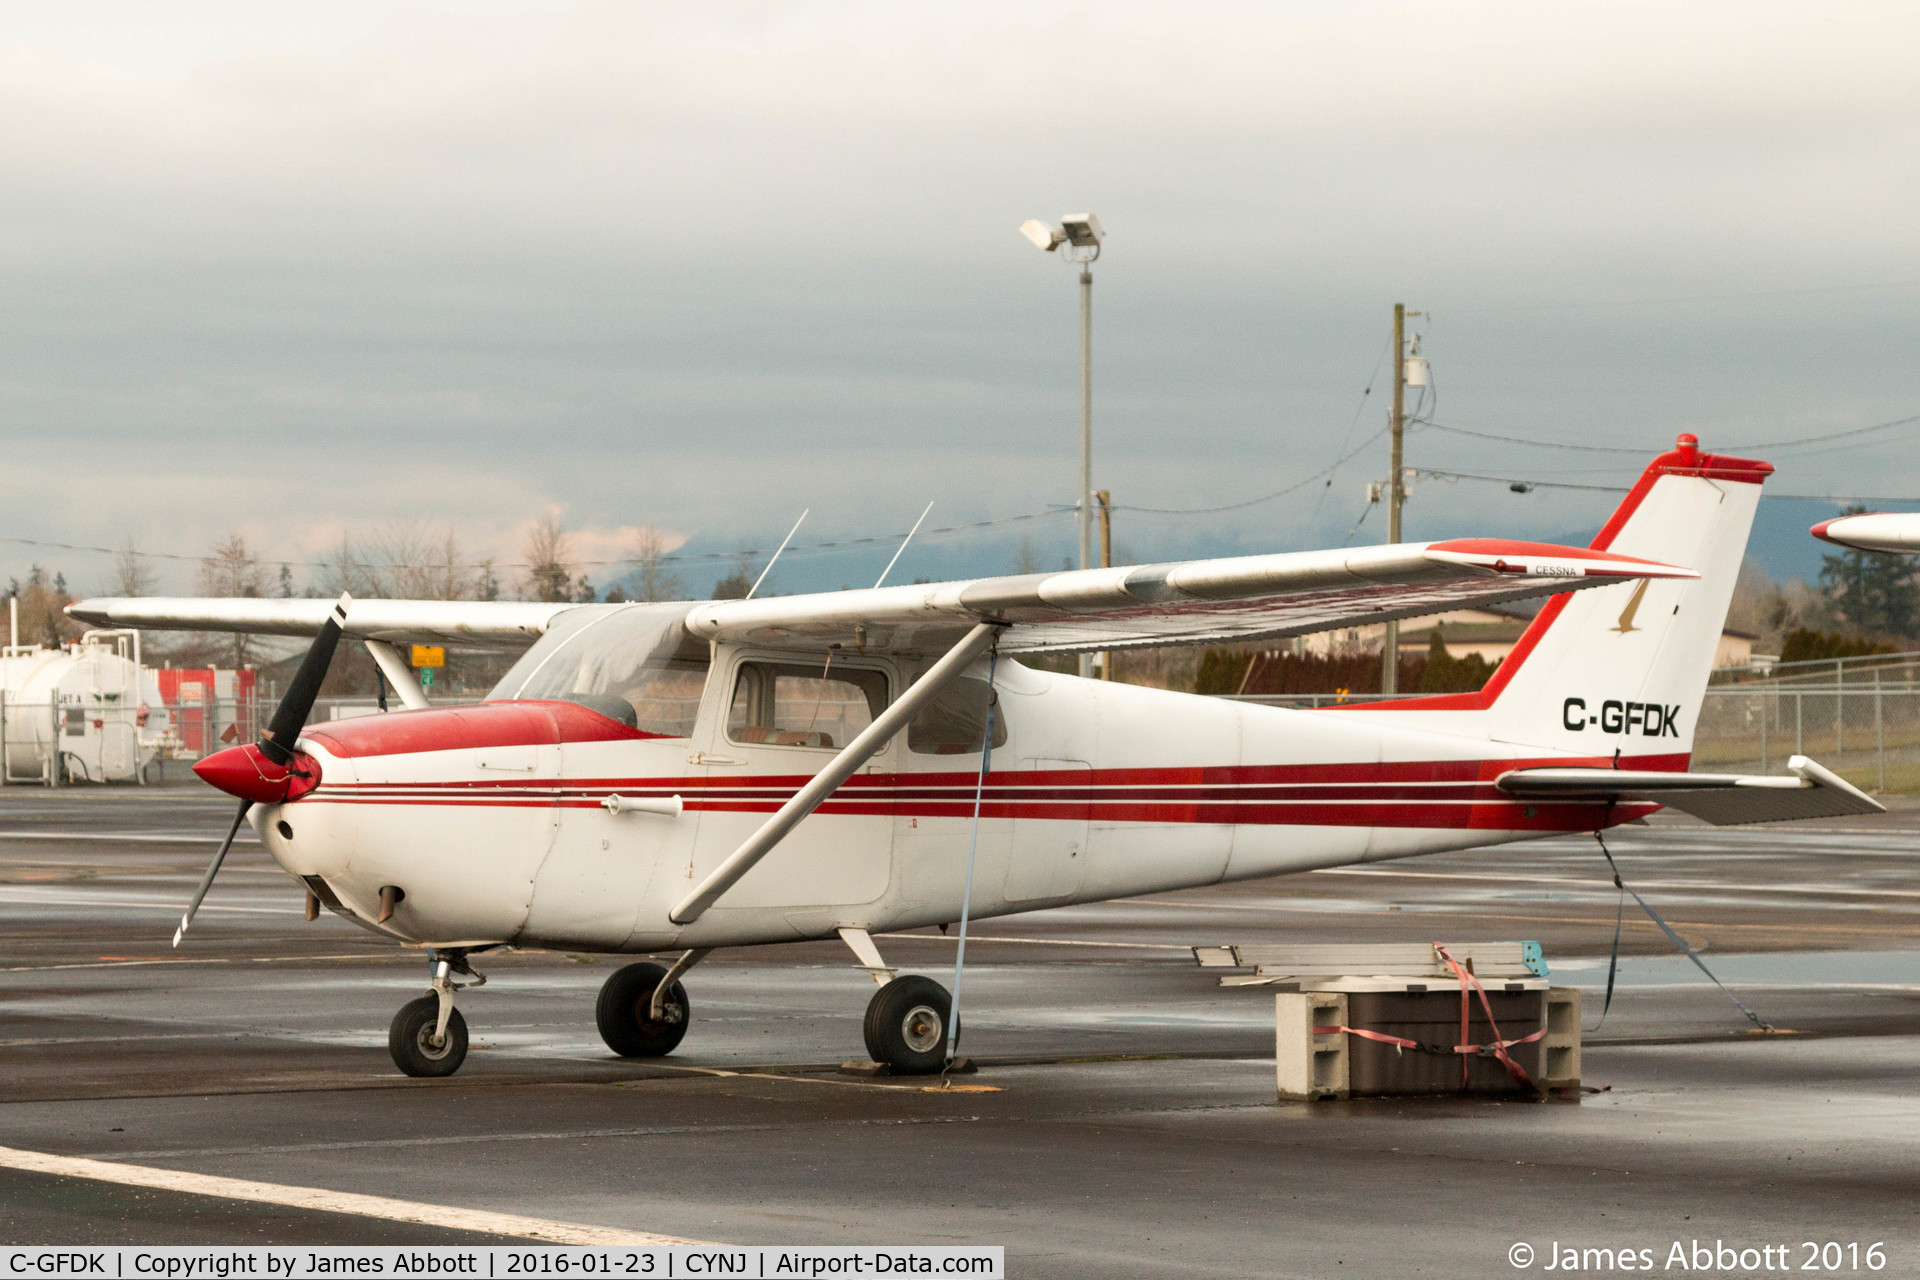 C-GFDK, 1962 Cessna 172C C/N 17248779, Sitting on the tarmac at Langley Regional Airport